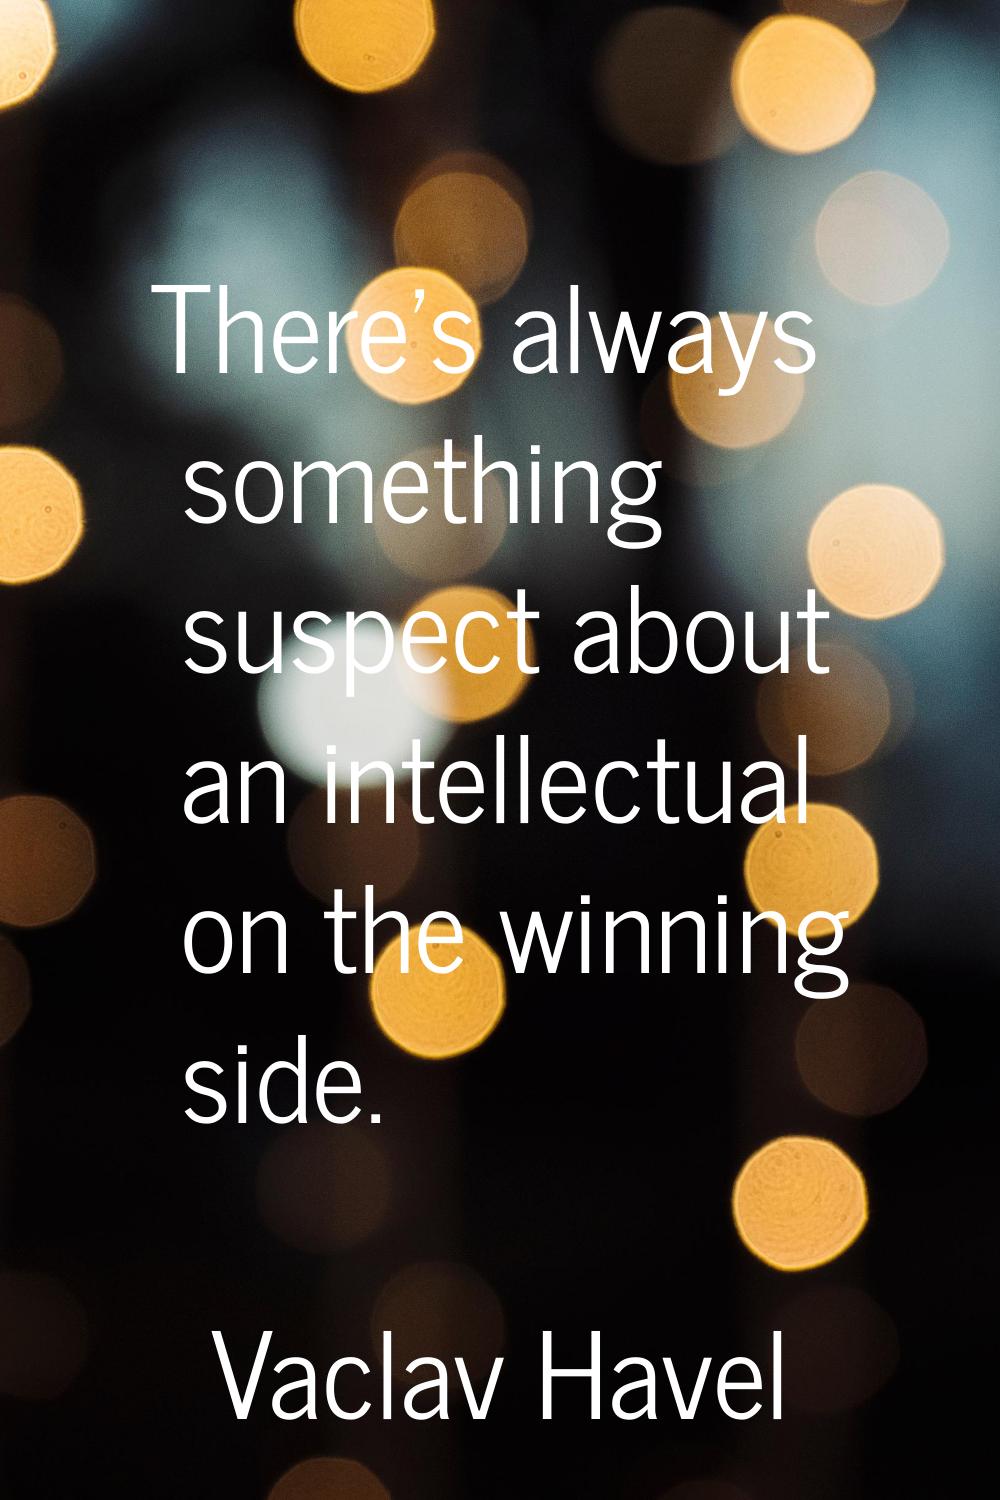 There's always something suspect about an intellectual on the winning side.